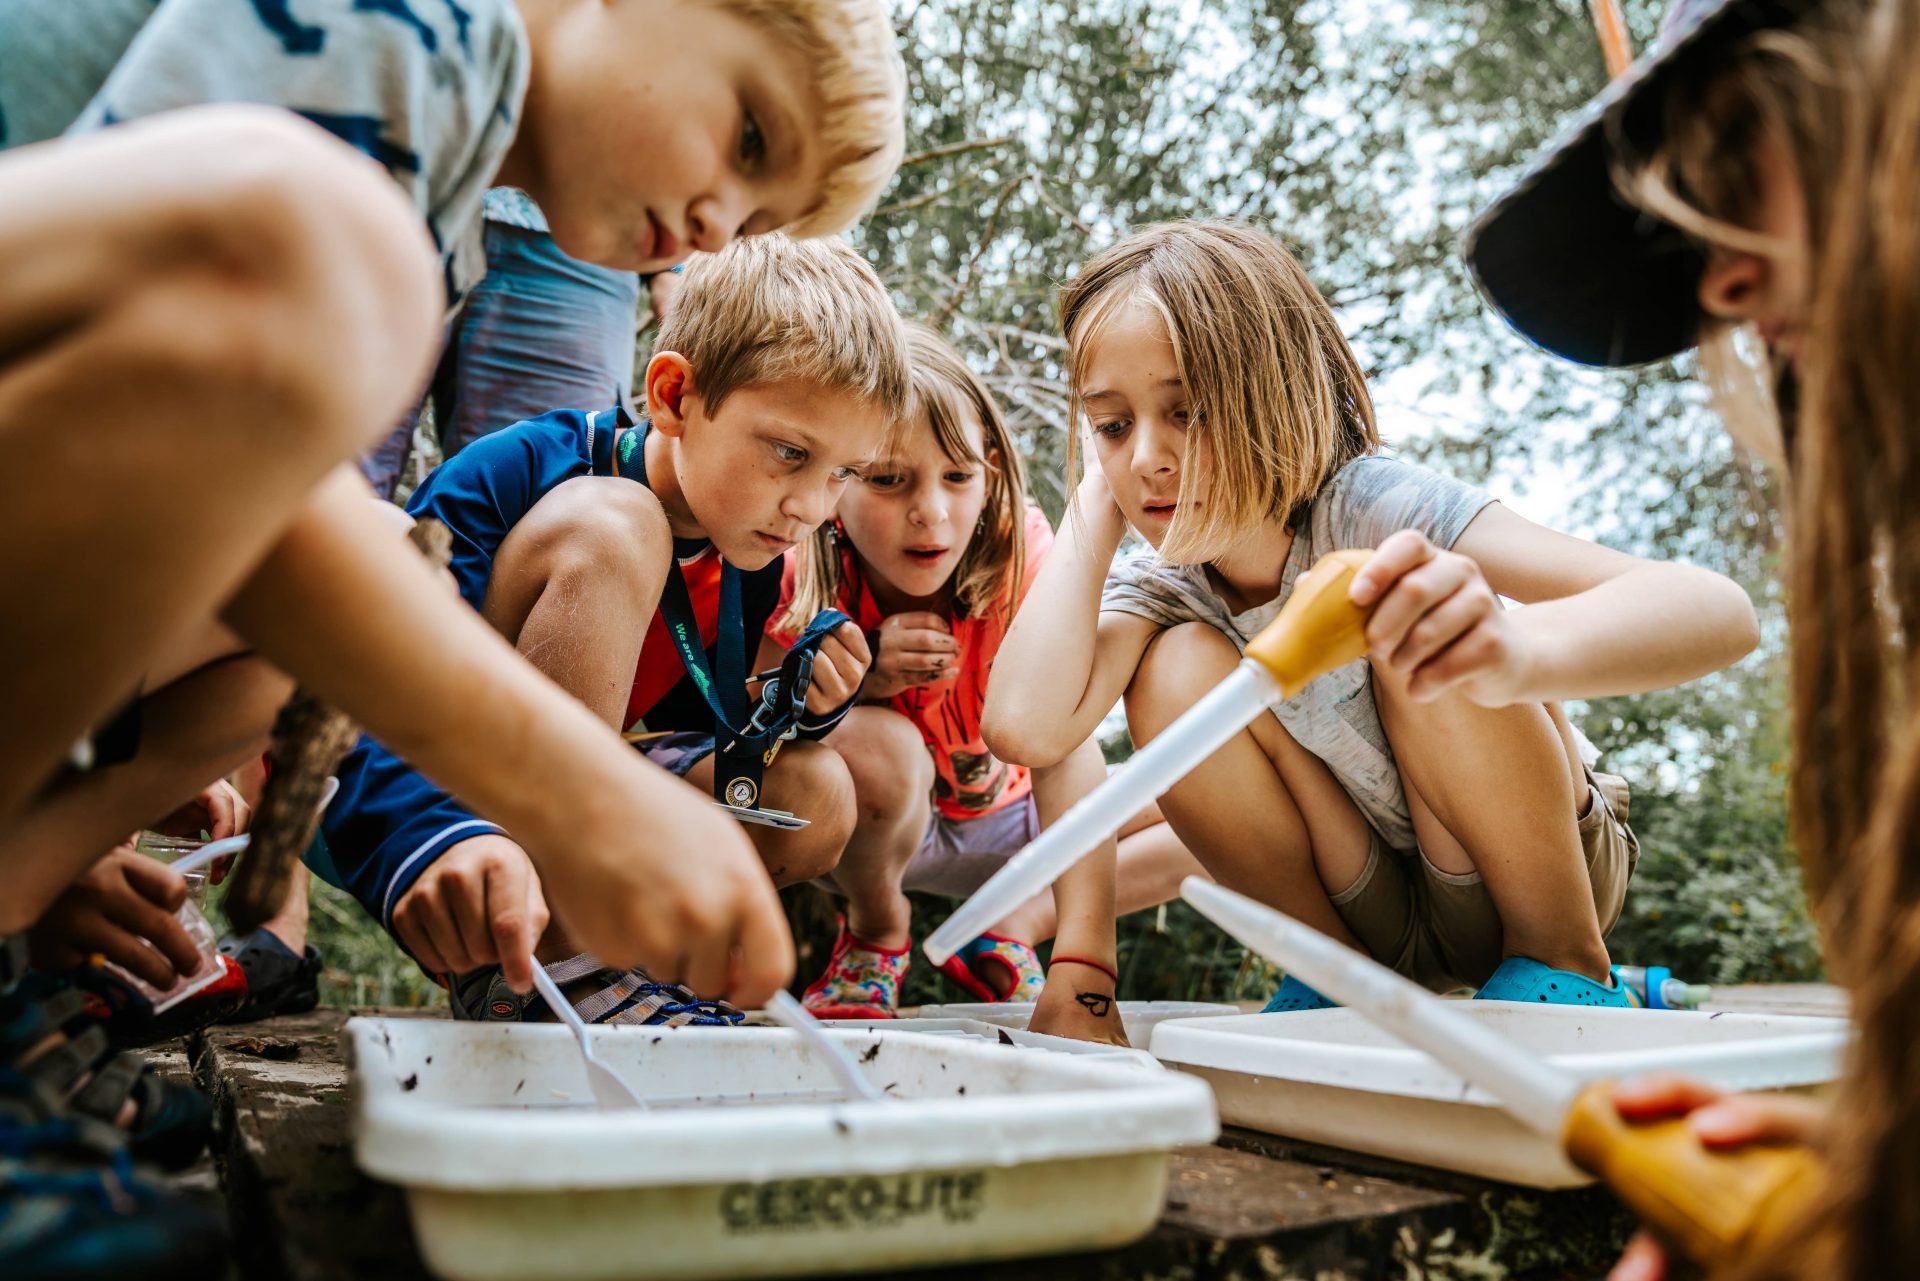 In What Ways Might Science Be Taught In The Outdoors?